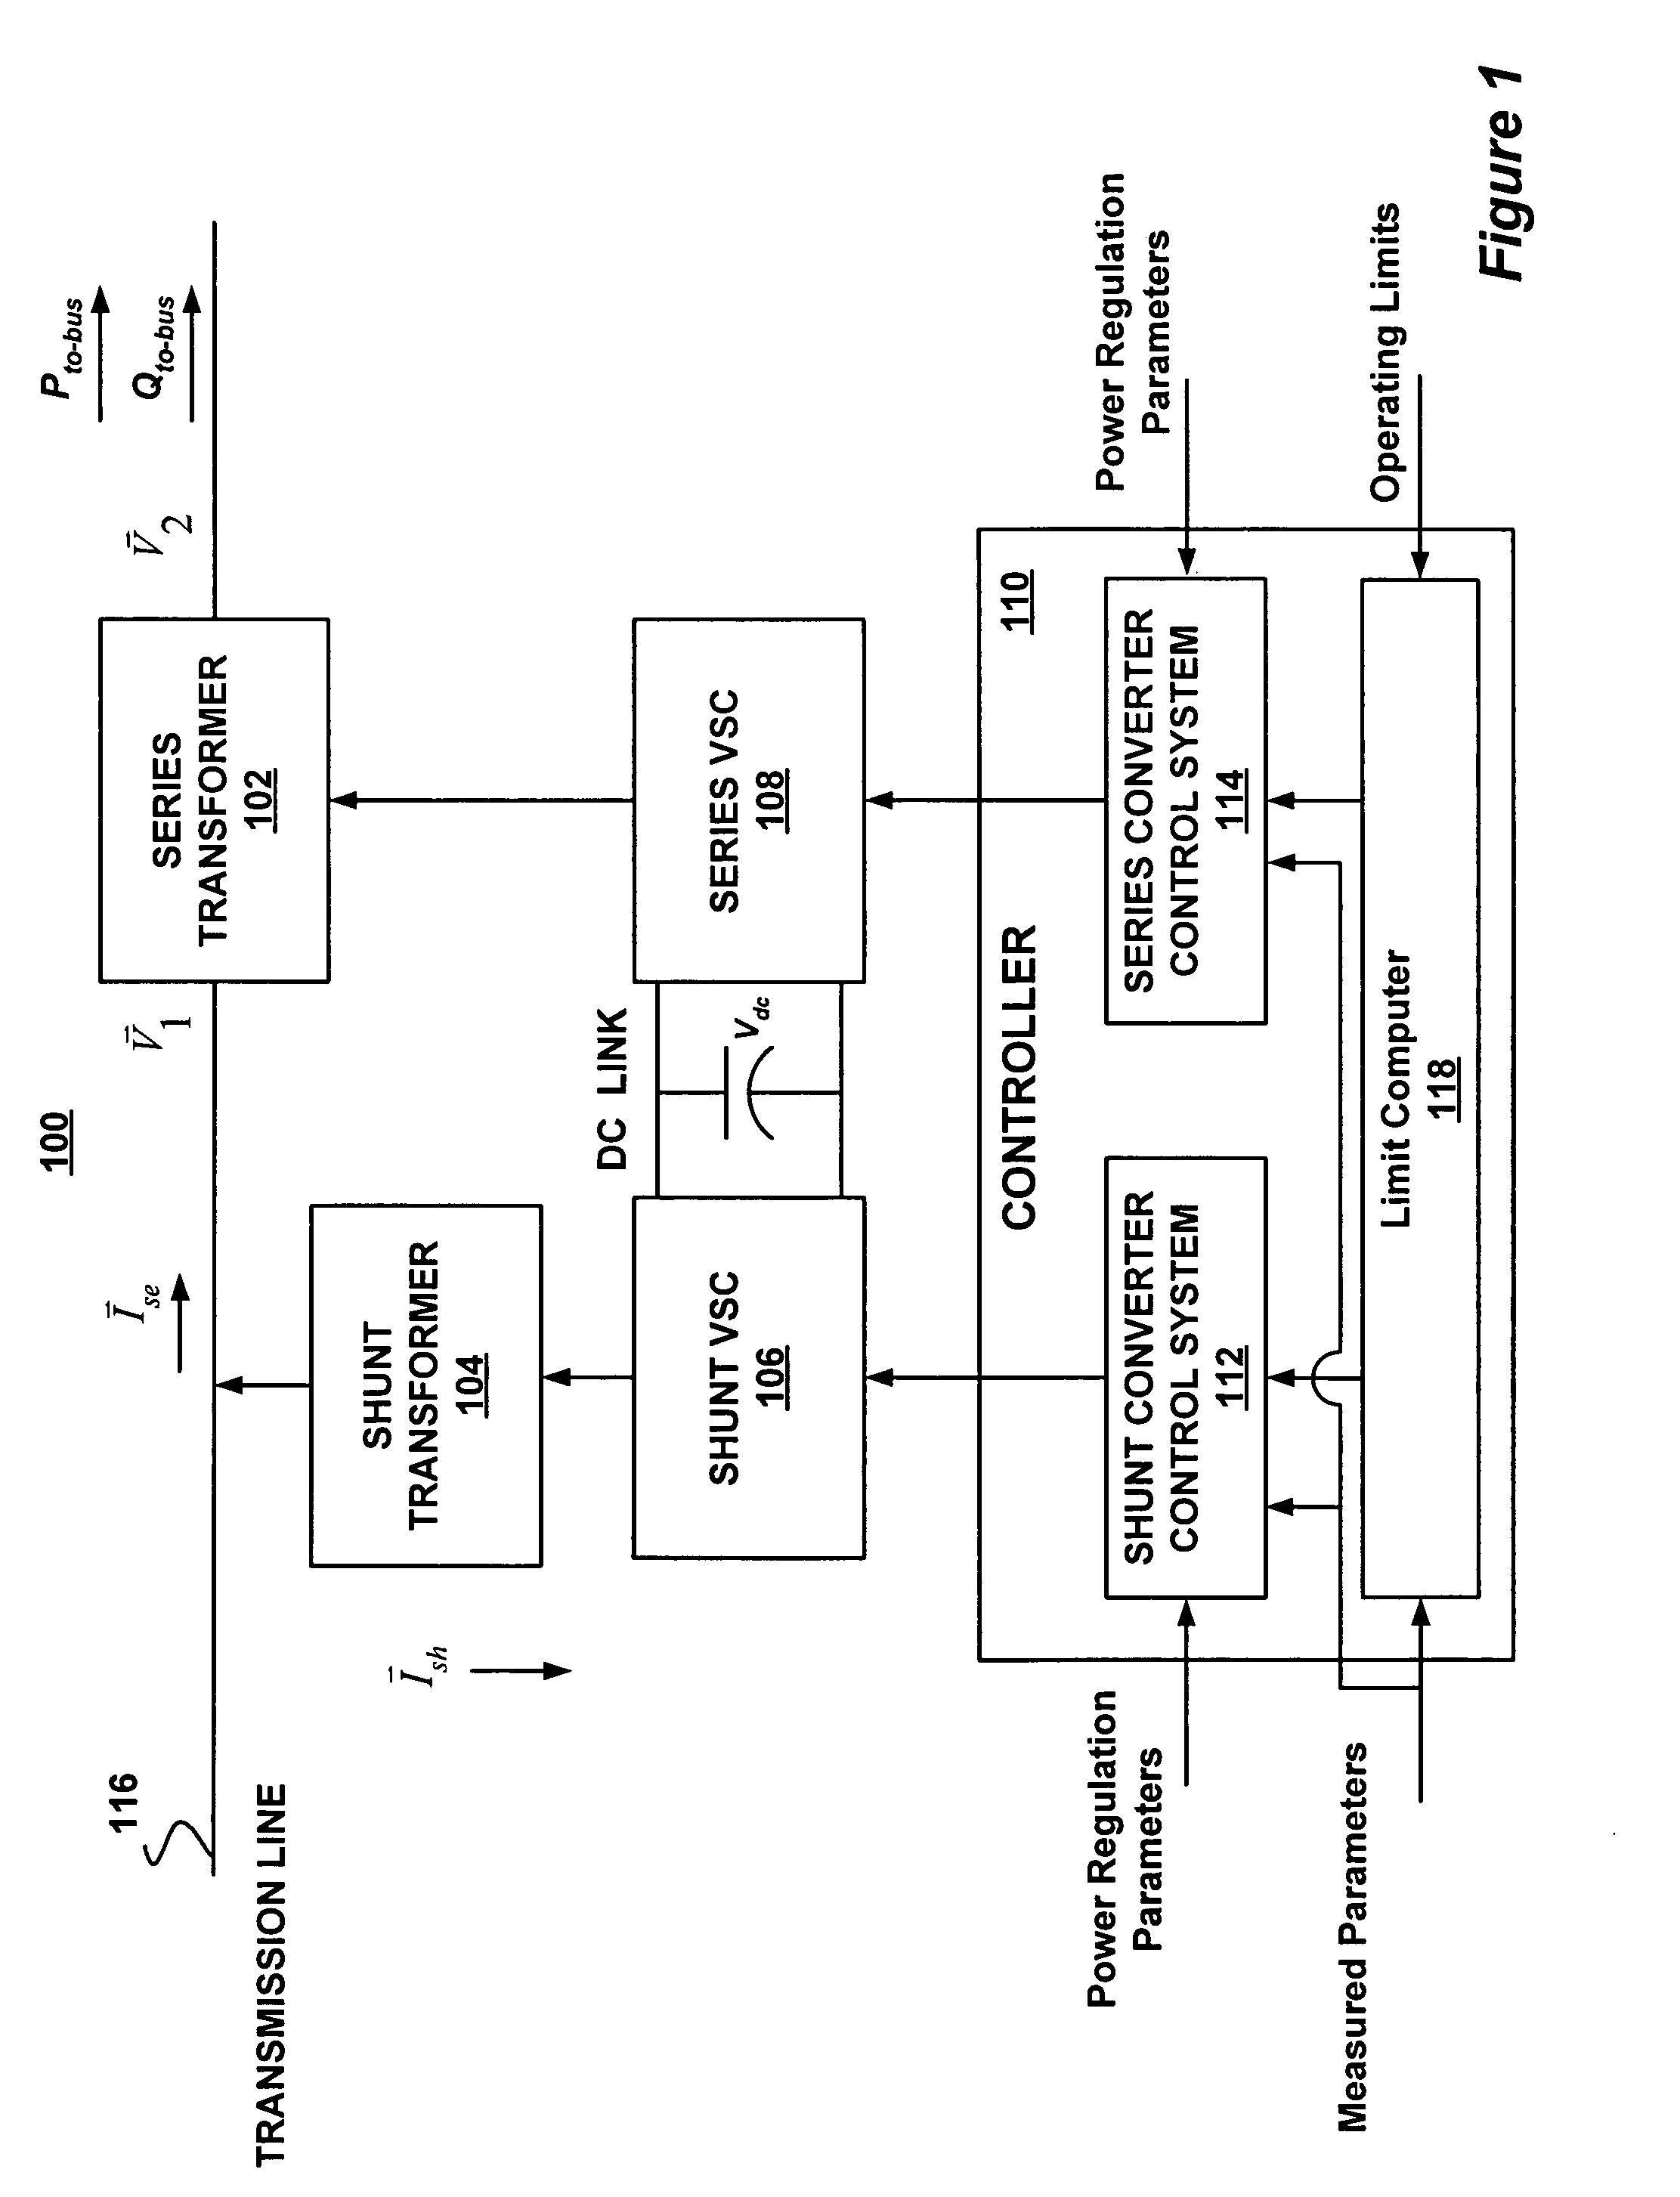 Power flow controller responsive to power circulation demand for optimizing power transfer